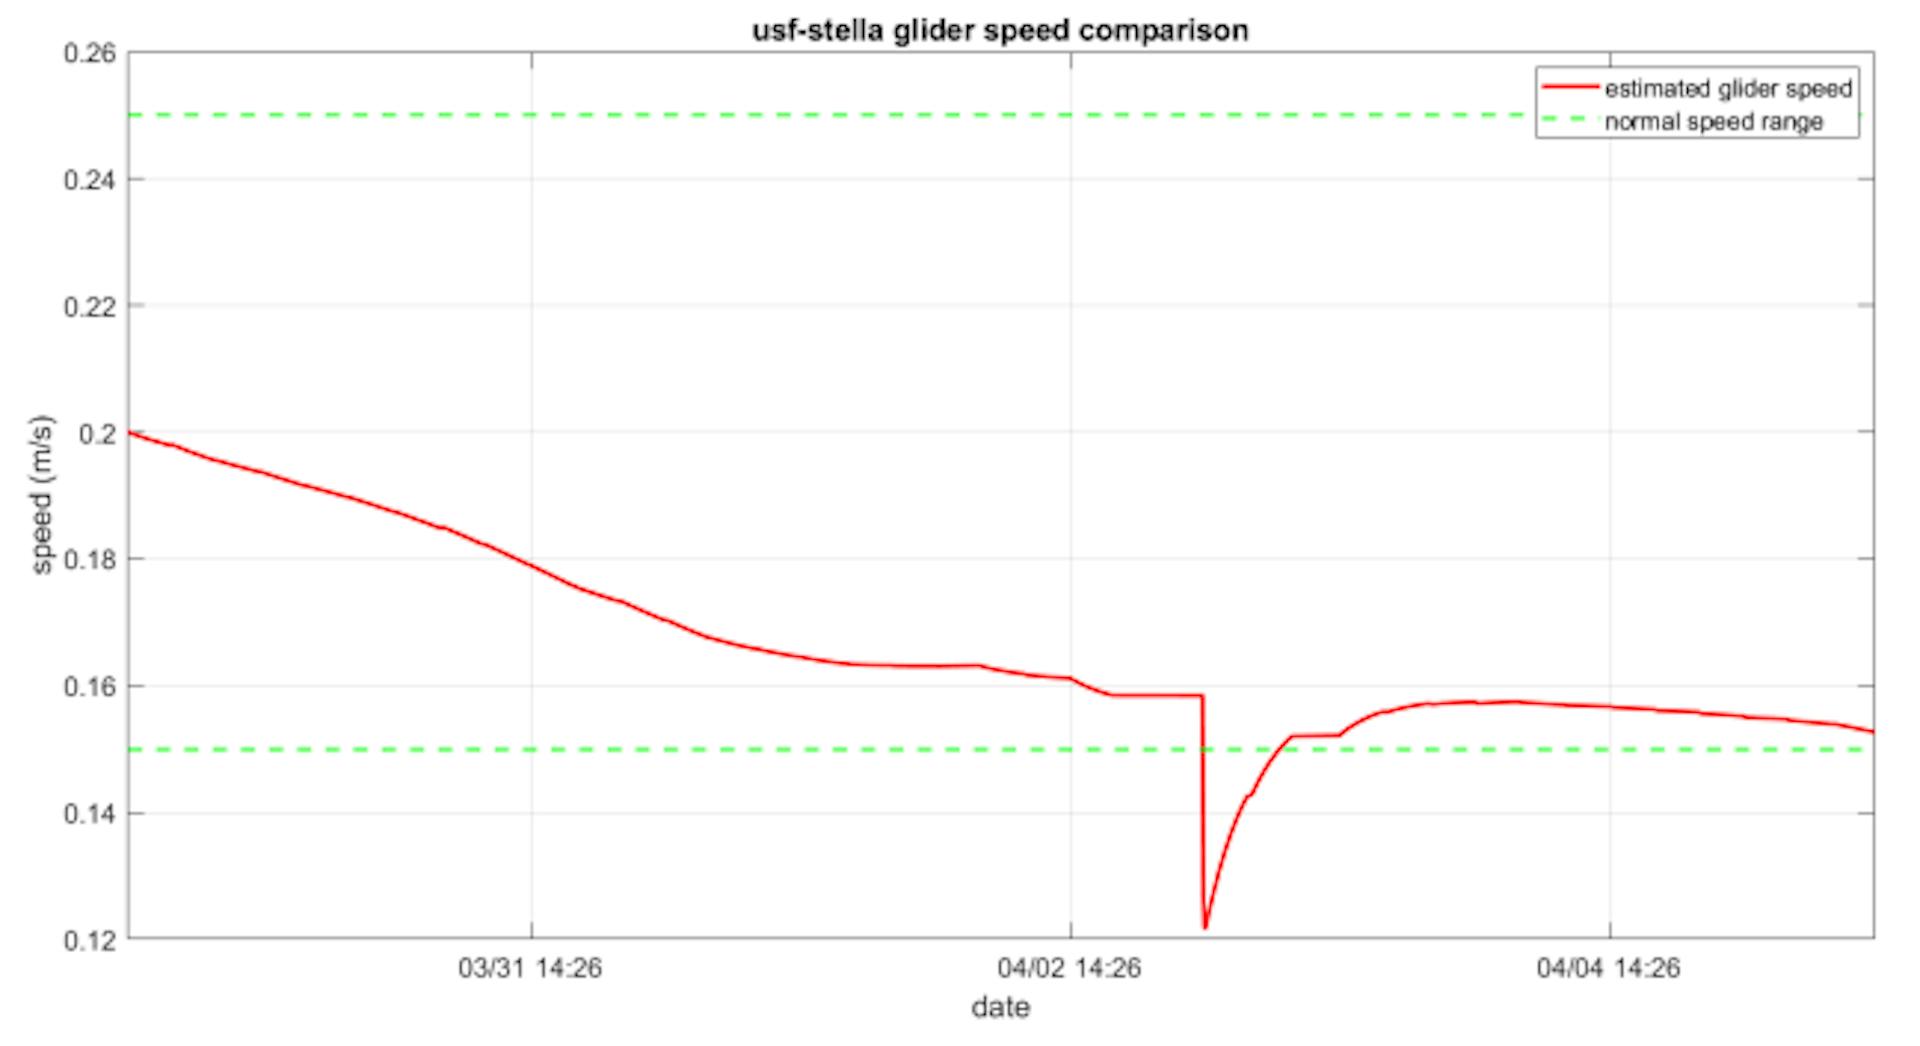 Fig. 28: Comparison of estimated glider speed (red) and normal speed range (green) for the 2023 USF-Stella deployment.